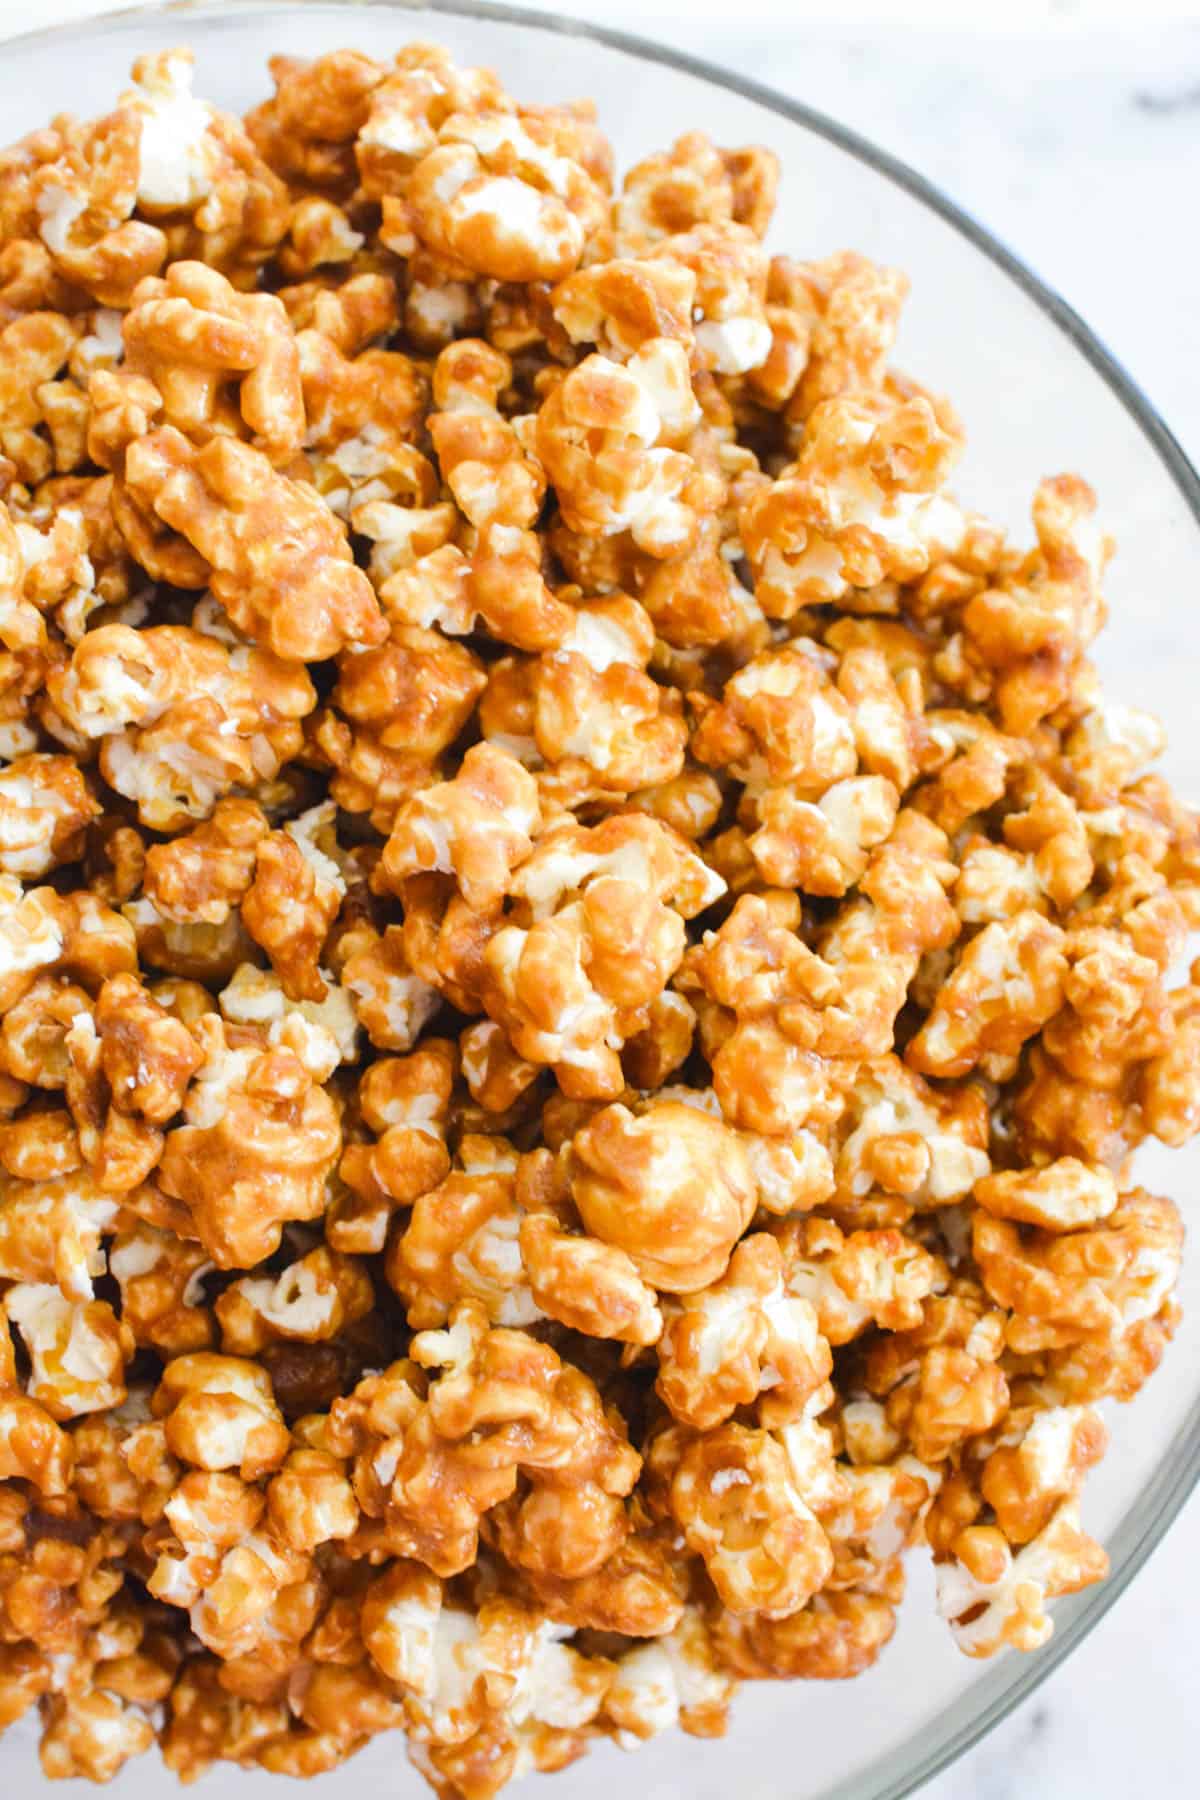 Overhead view of a bowl of caramel corn.